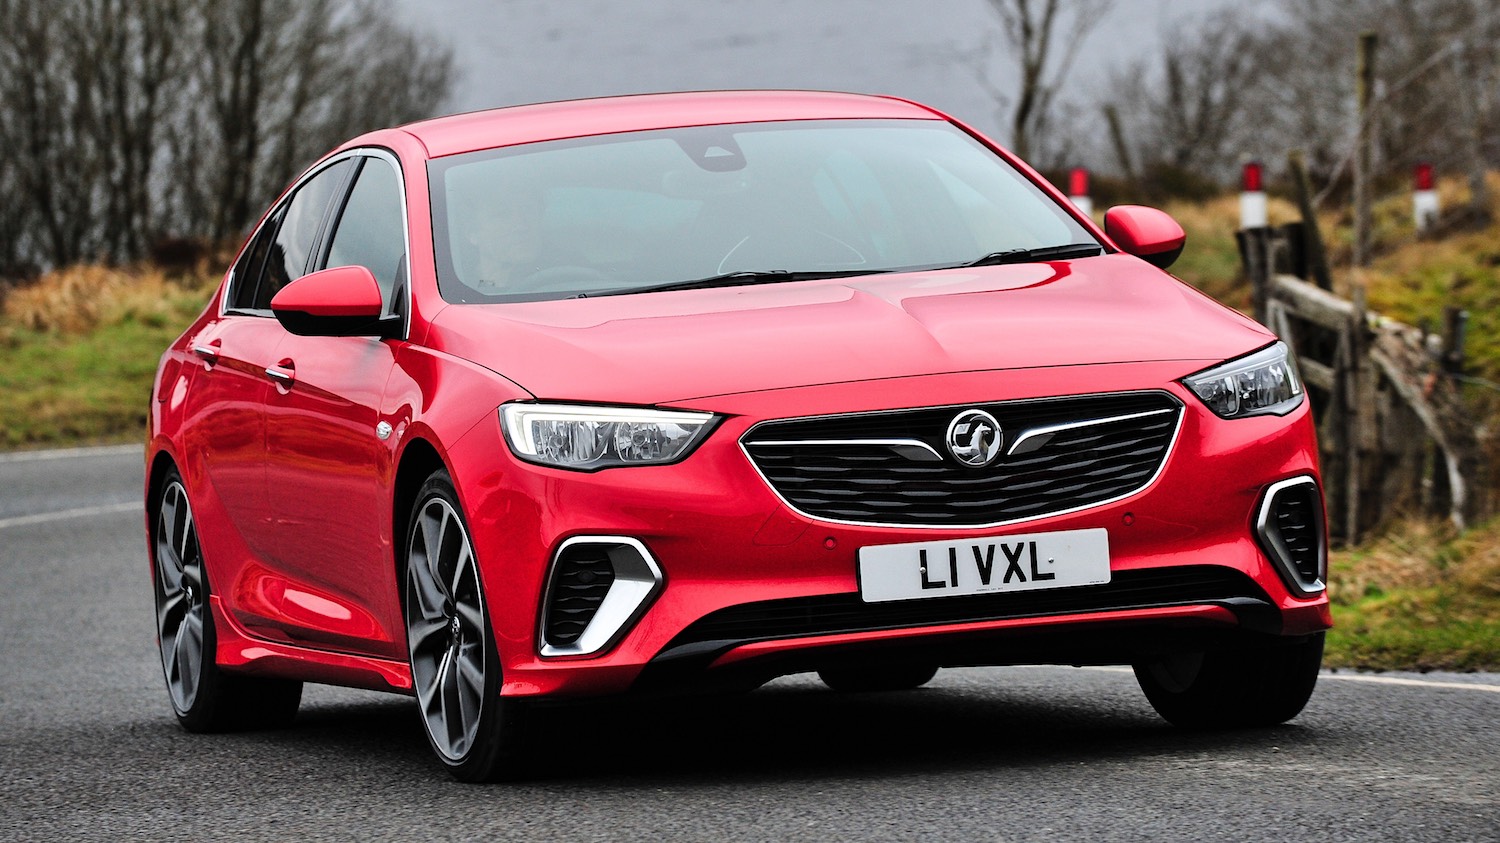 Tom Scanlan reviews the Vauxhall Insignia GSi Sportshatch for Drive 10